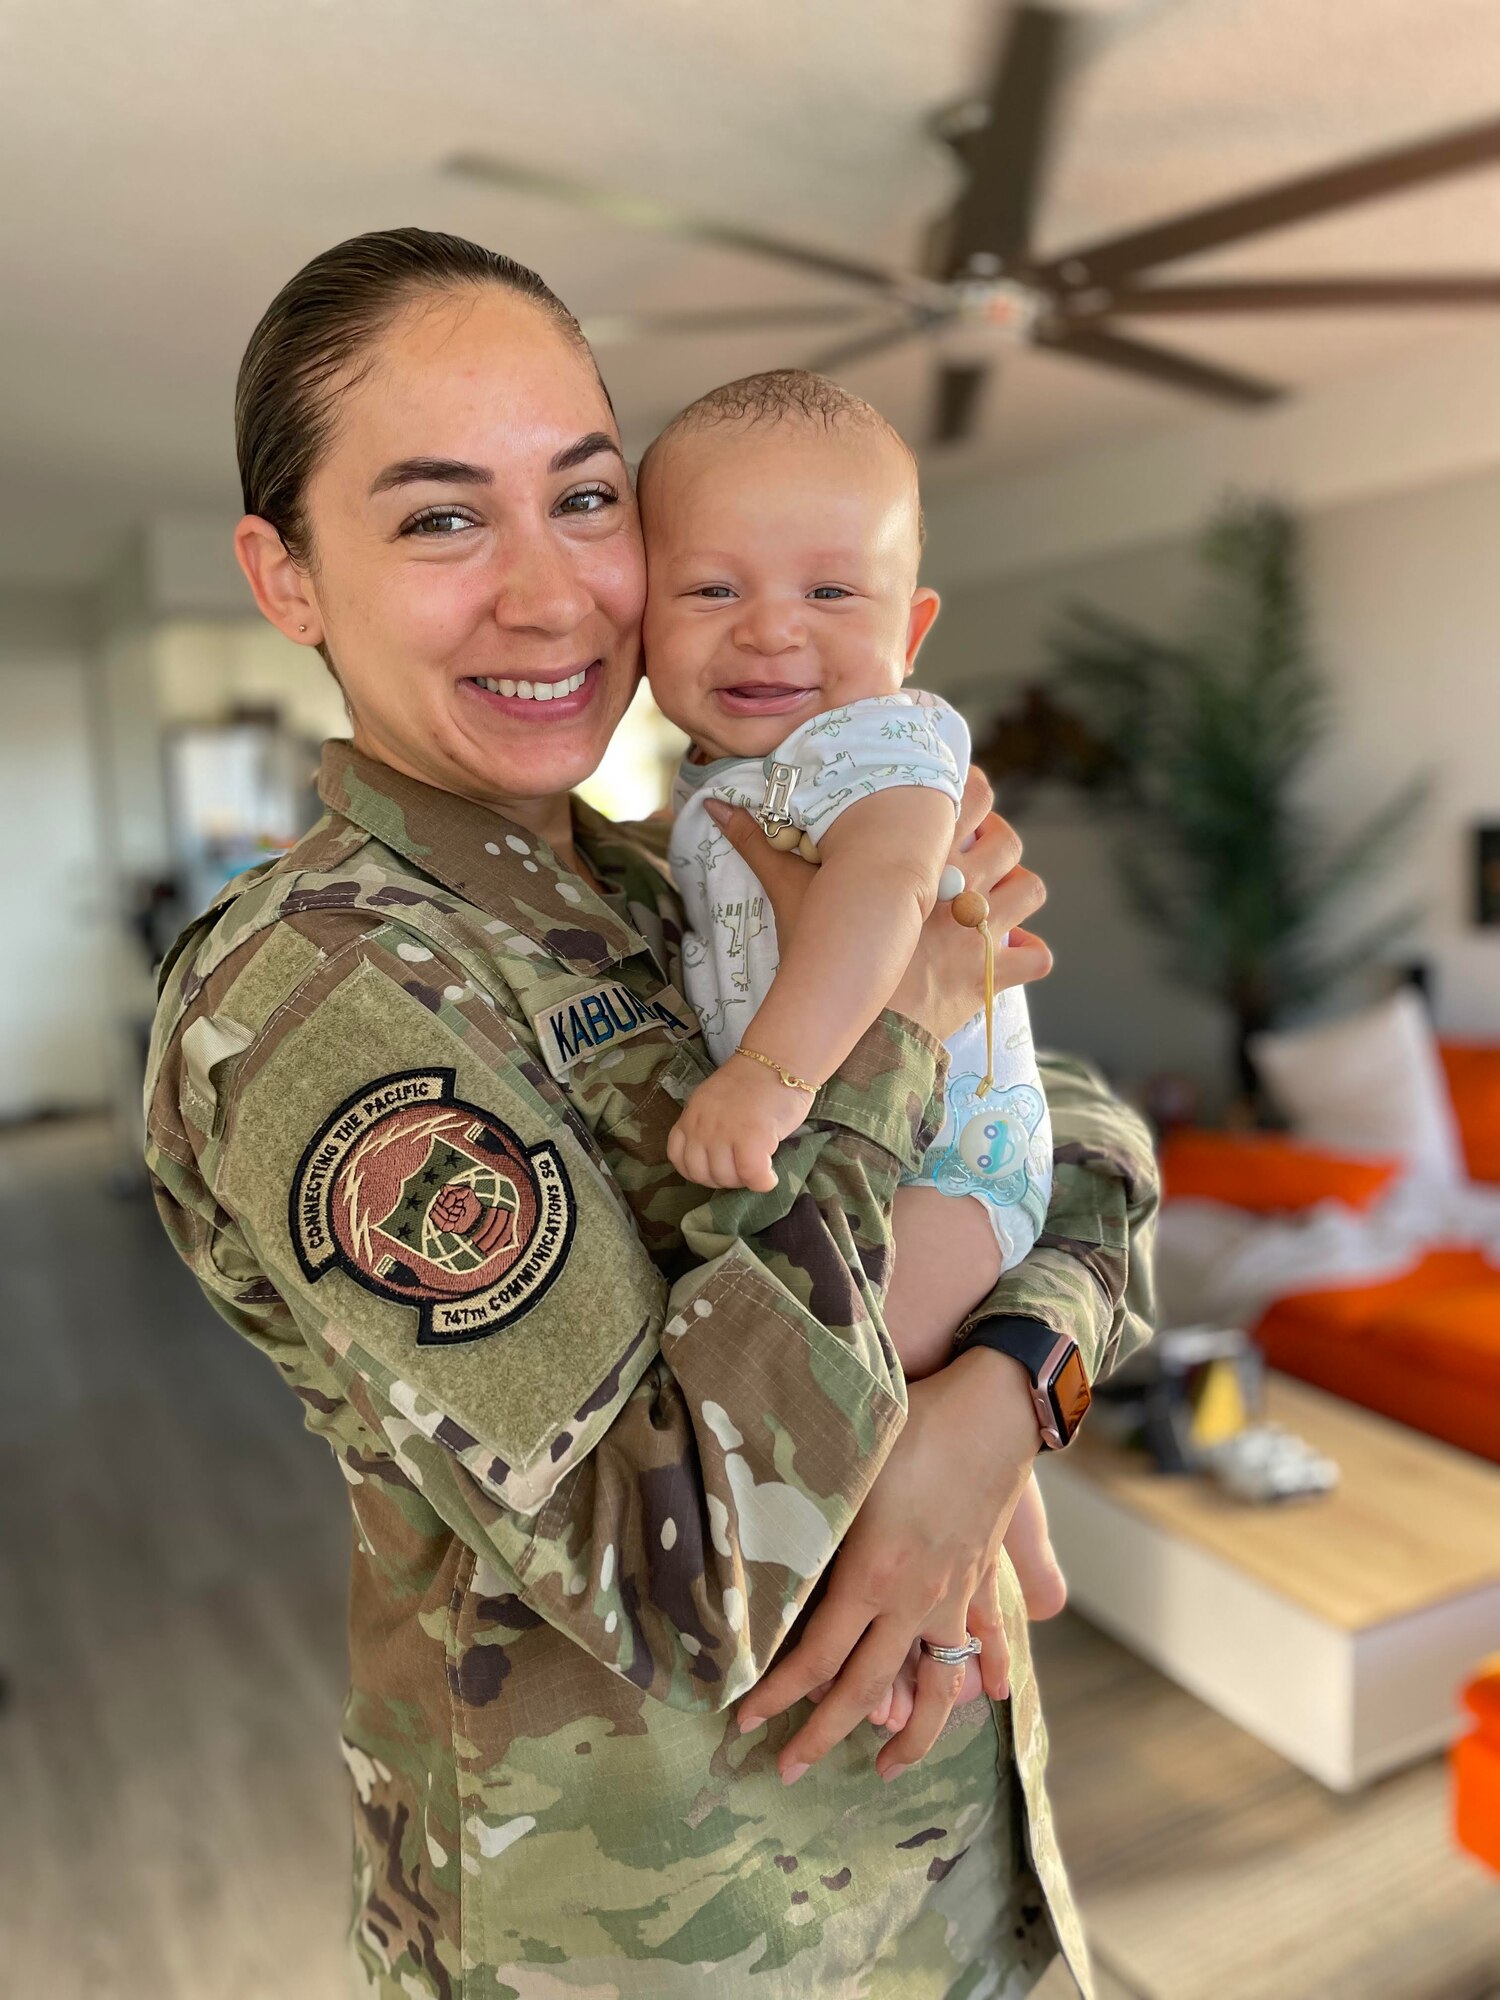 U.S. Space Force Capt. Charlene Kabuanseya, 747th Communications Squadron cyber defense flight commander, holds her 5-month-old child, Leo, in Honolulu, Hawaii, June 15, 2021. Kabuanseya recently reunited with Leo after a 45-day temporary duty travel. As a new nursing mother, she continued to provide breast milk while gone and received reimbursement with her commander’s approval, making it one of the first instances for a service member in the Department of Defense. (Courtesy photo)